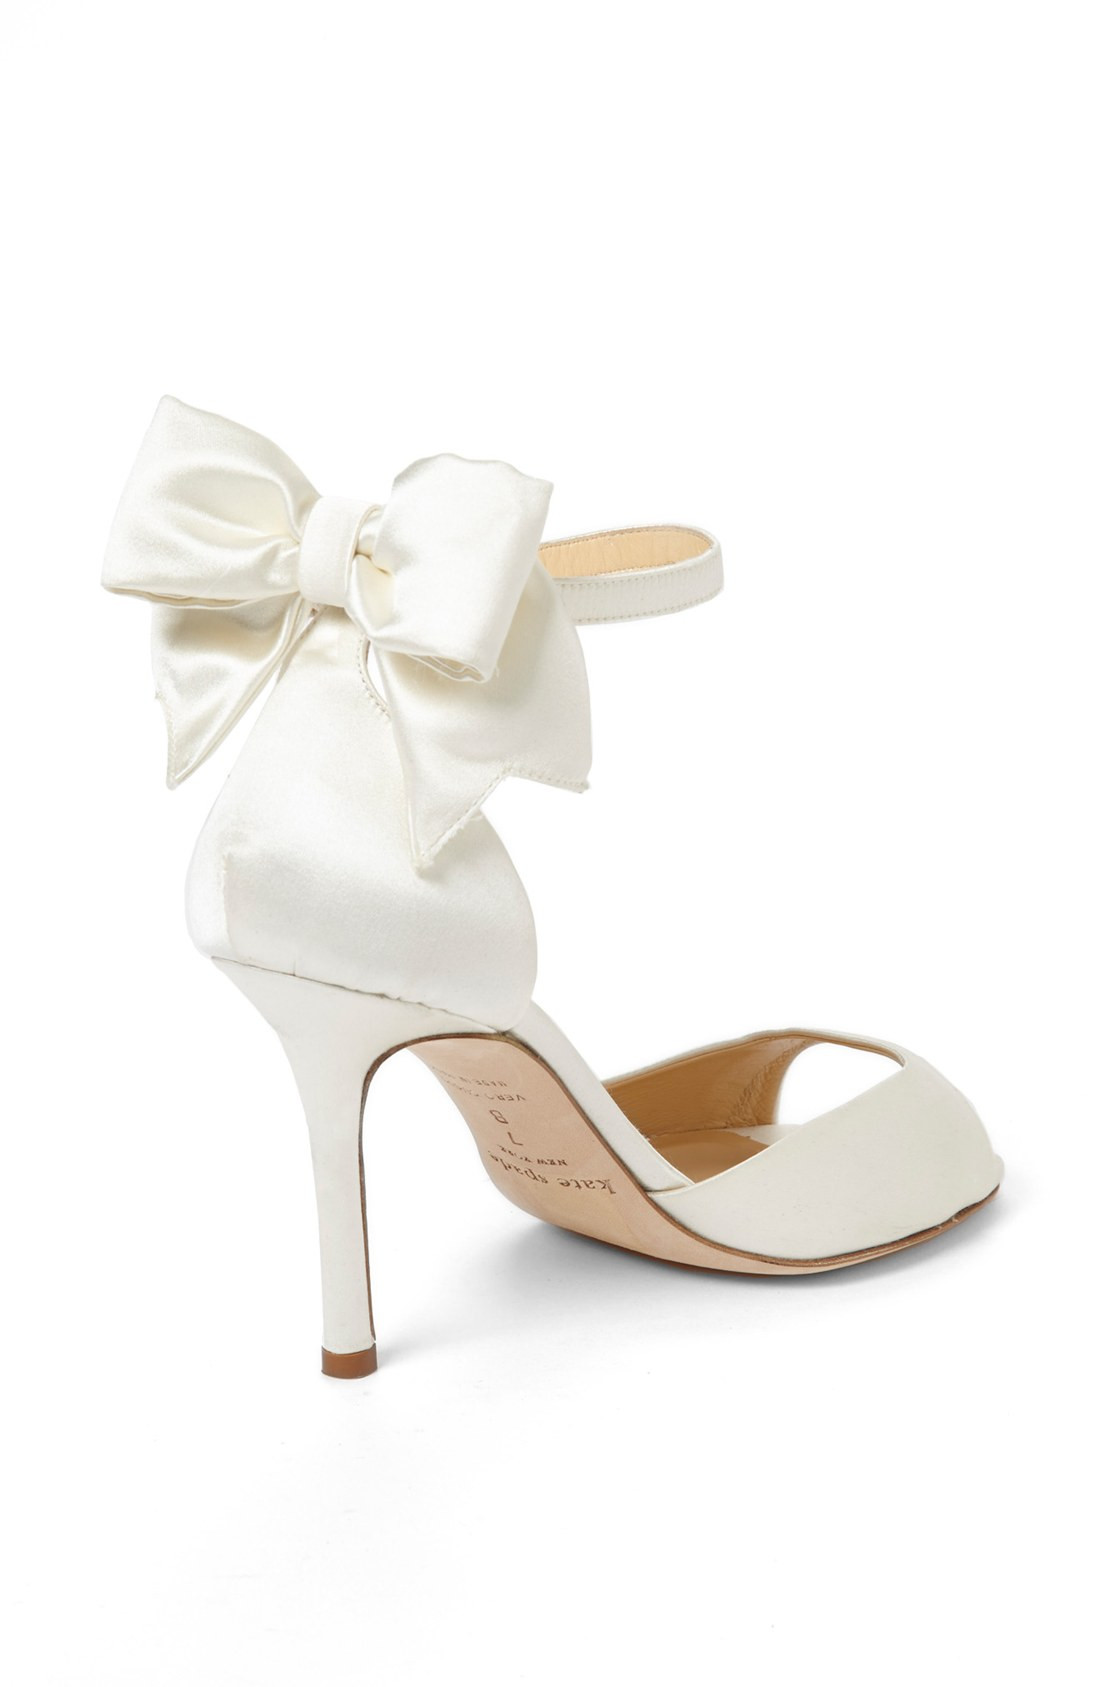 Ann Taylor Wedding Shoes
 Shoeniverse Summer Wedding Style with KATE SPADE White